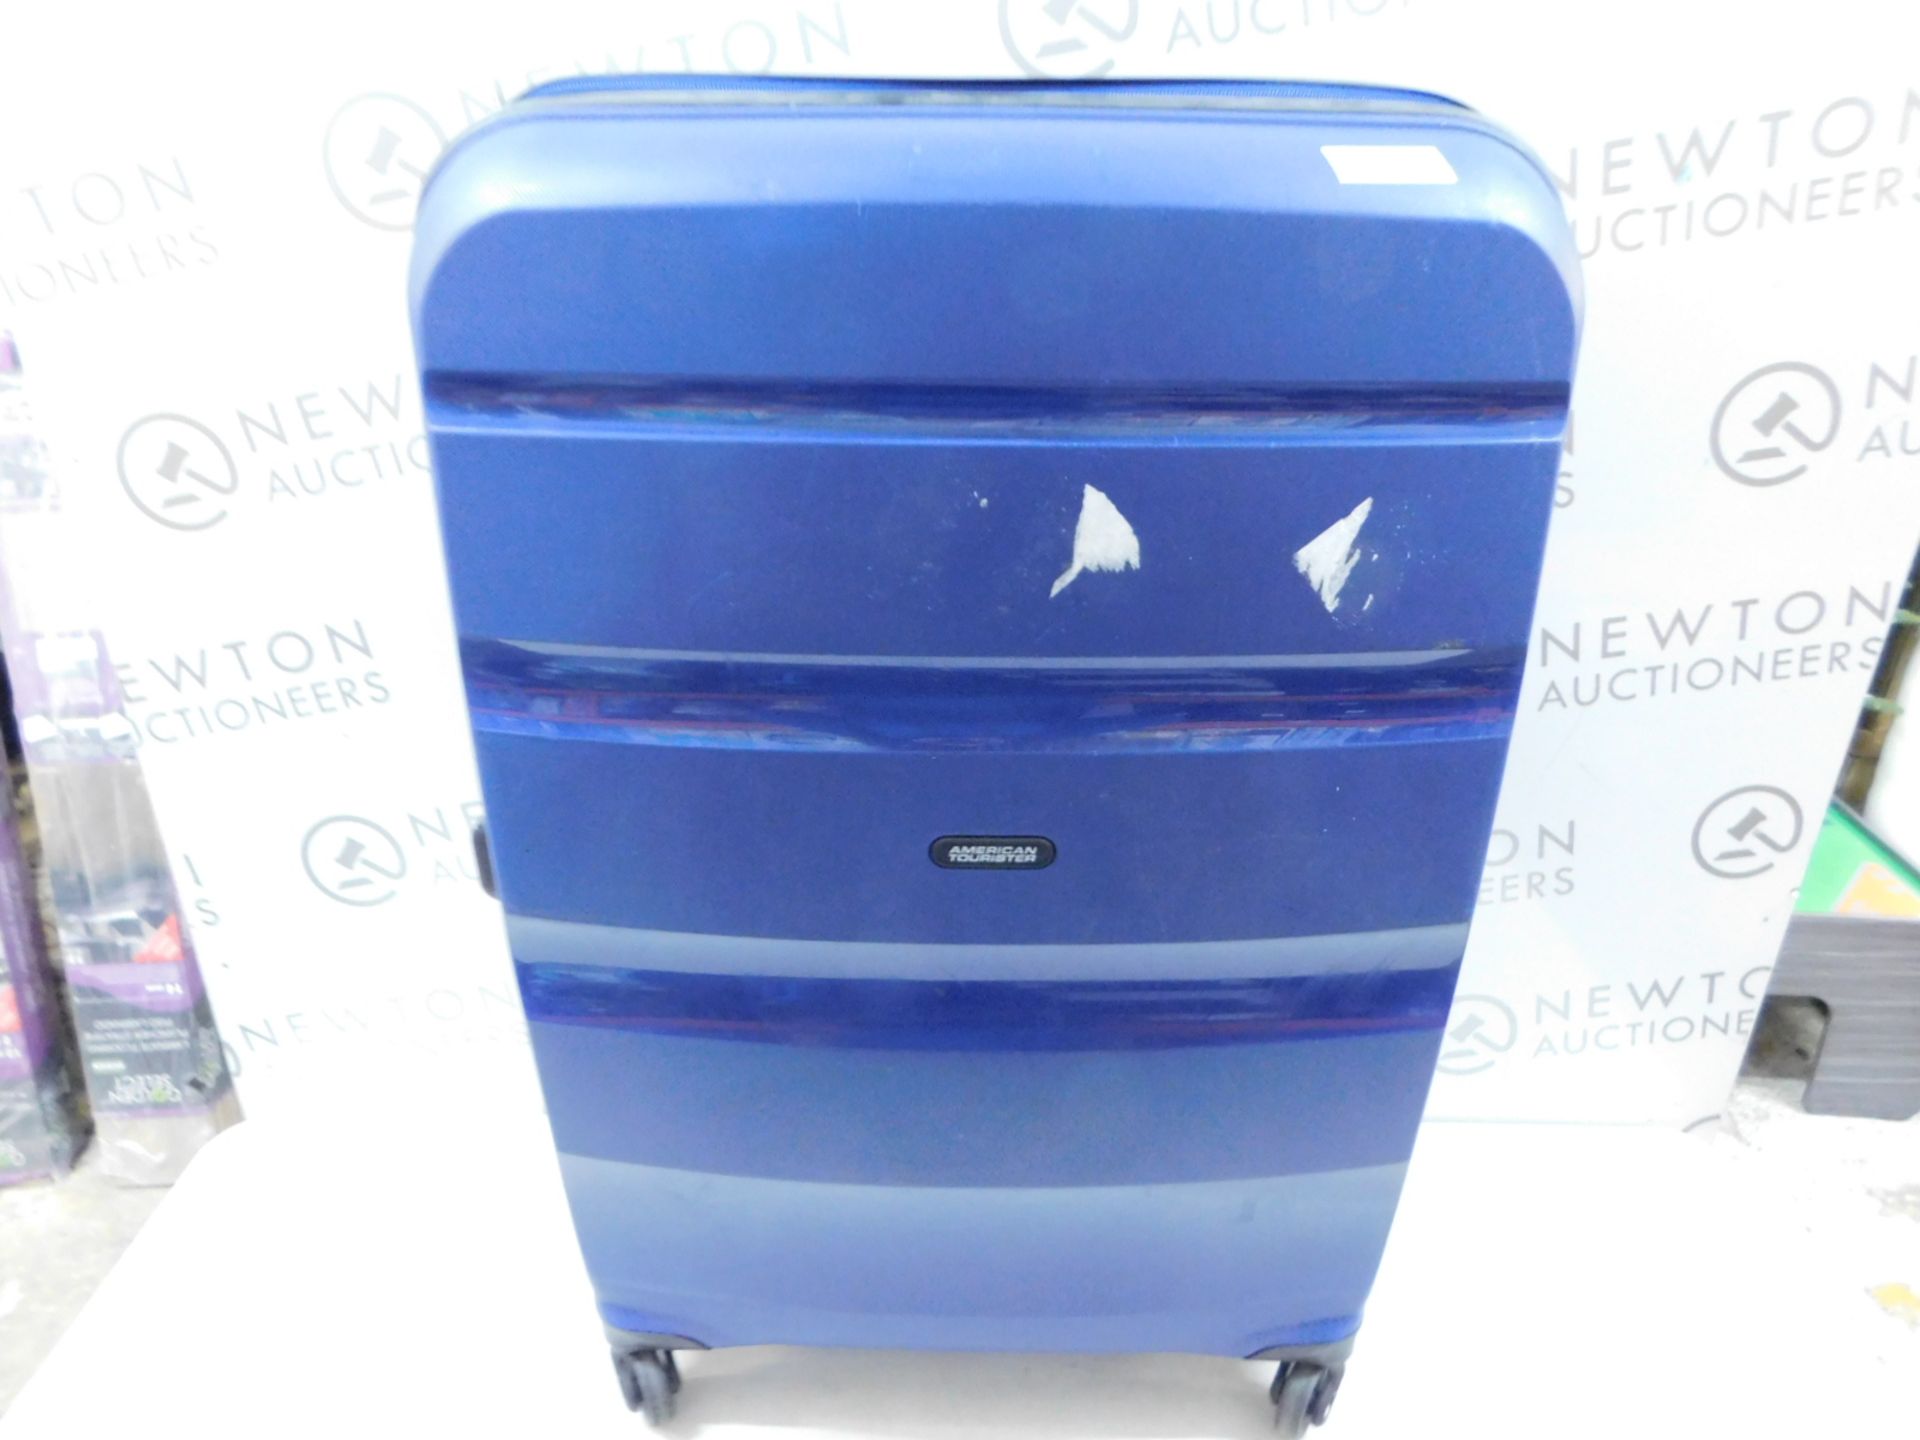 1 AMERICAN TOURISTER COMBI-LOCK BLUE HARDSIDE PROTECTION LUGGAGE CASE RRP £149.99